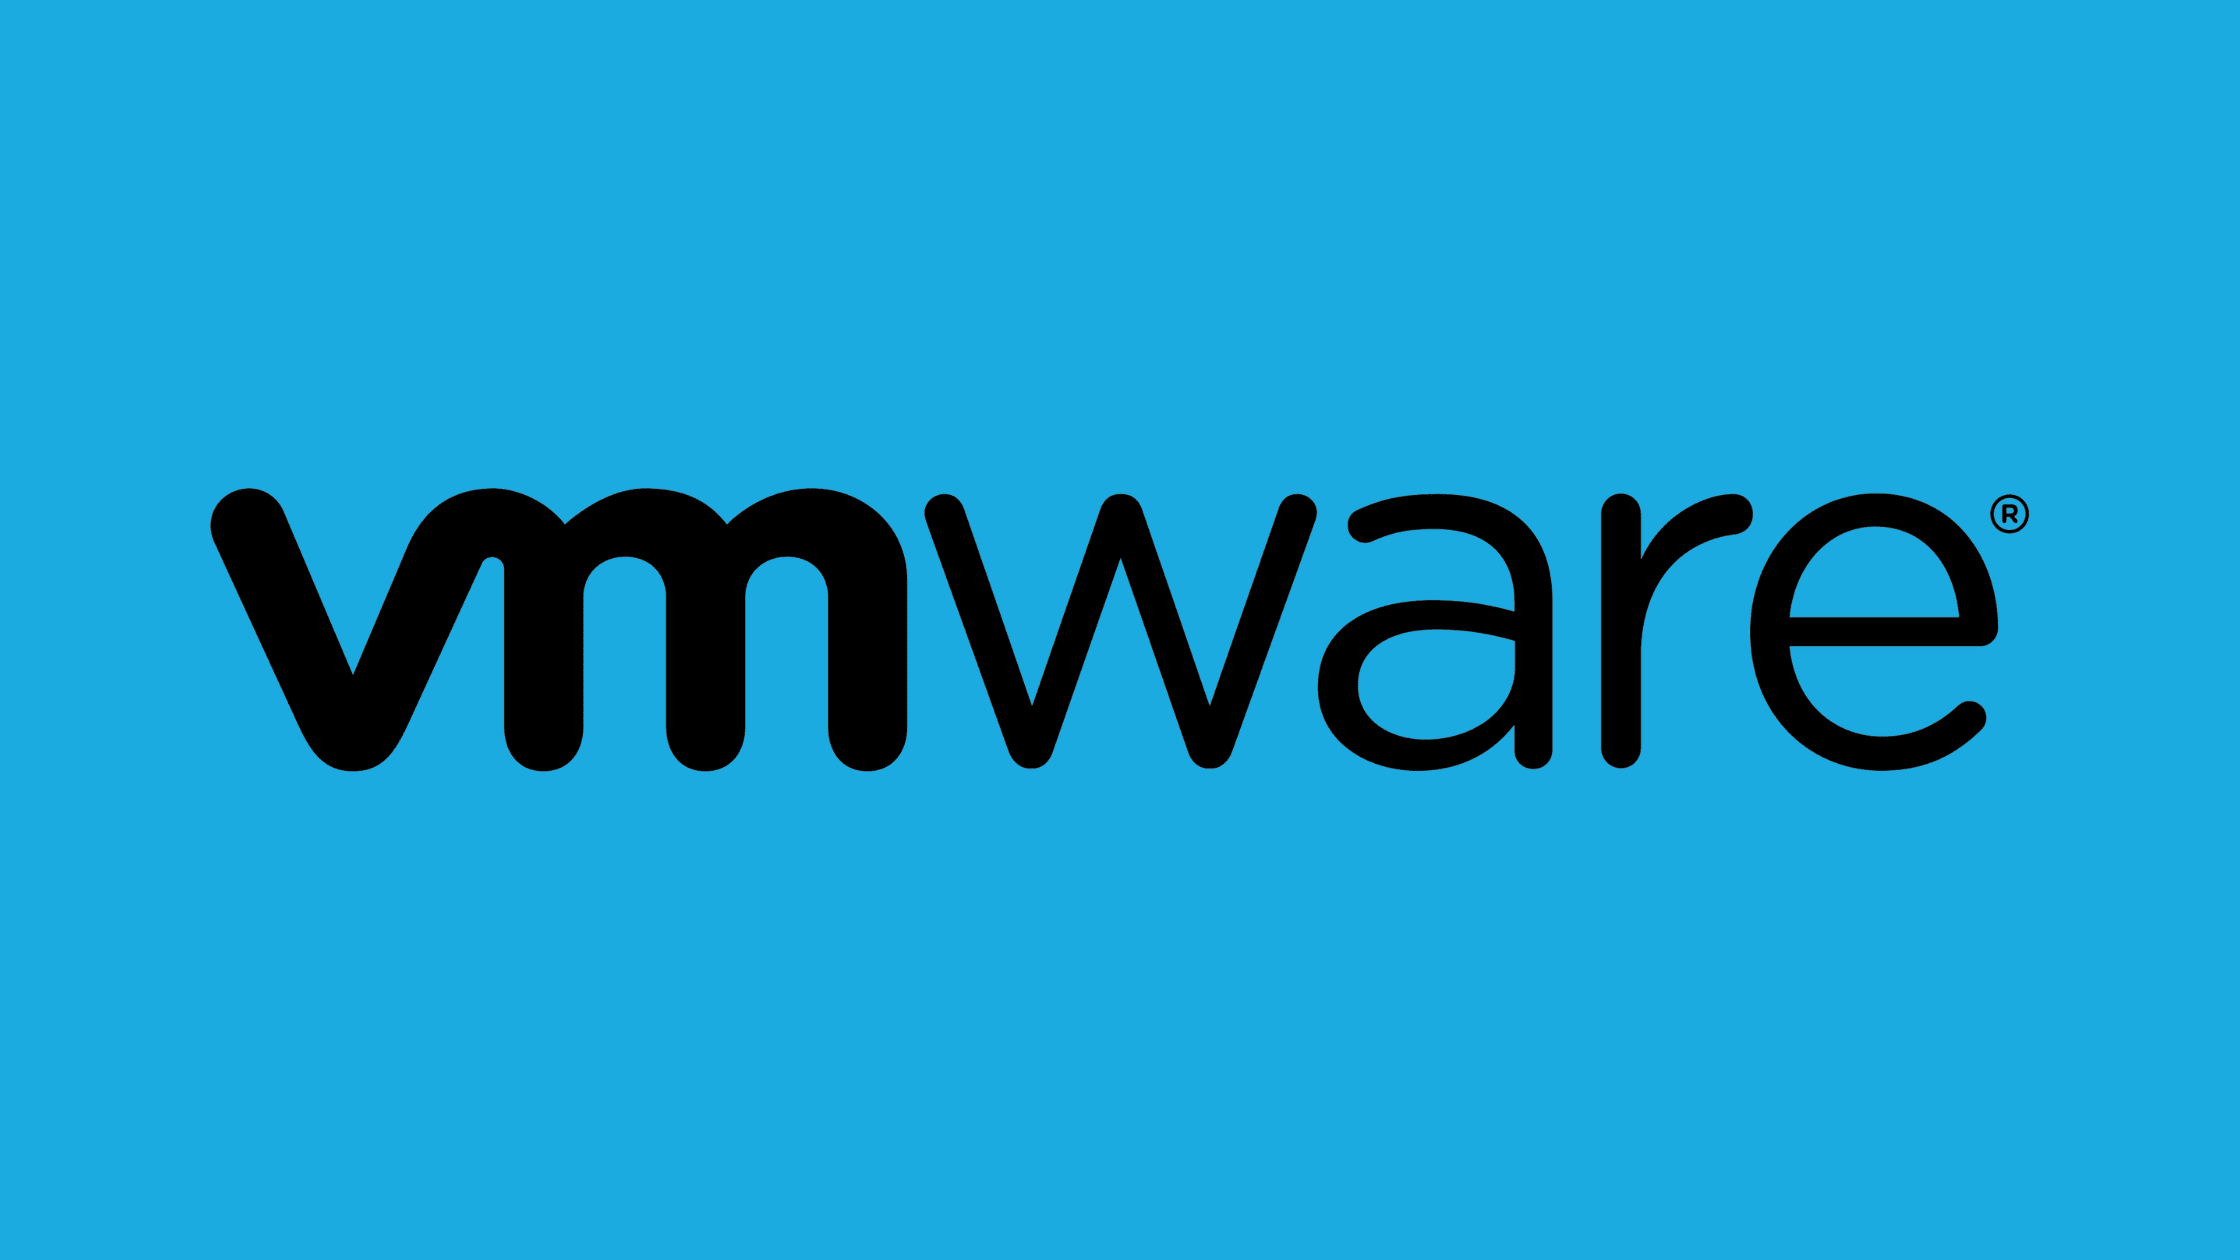 How To Patch The 10 New Vulnerabilities In Vmware Products Cve 2022 31656 To Cve 2022 31665